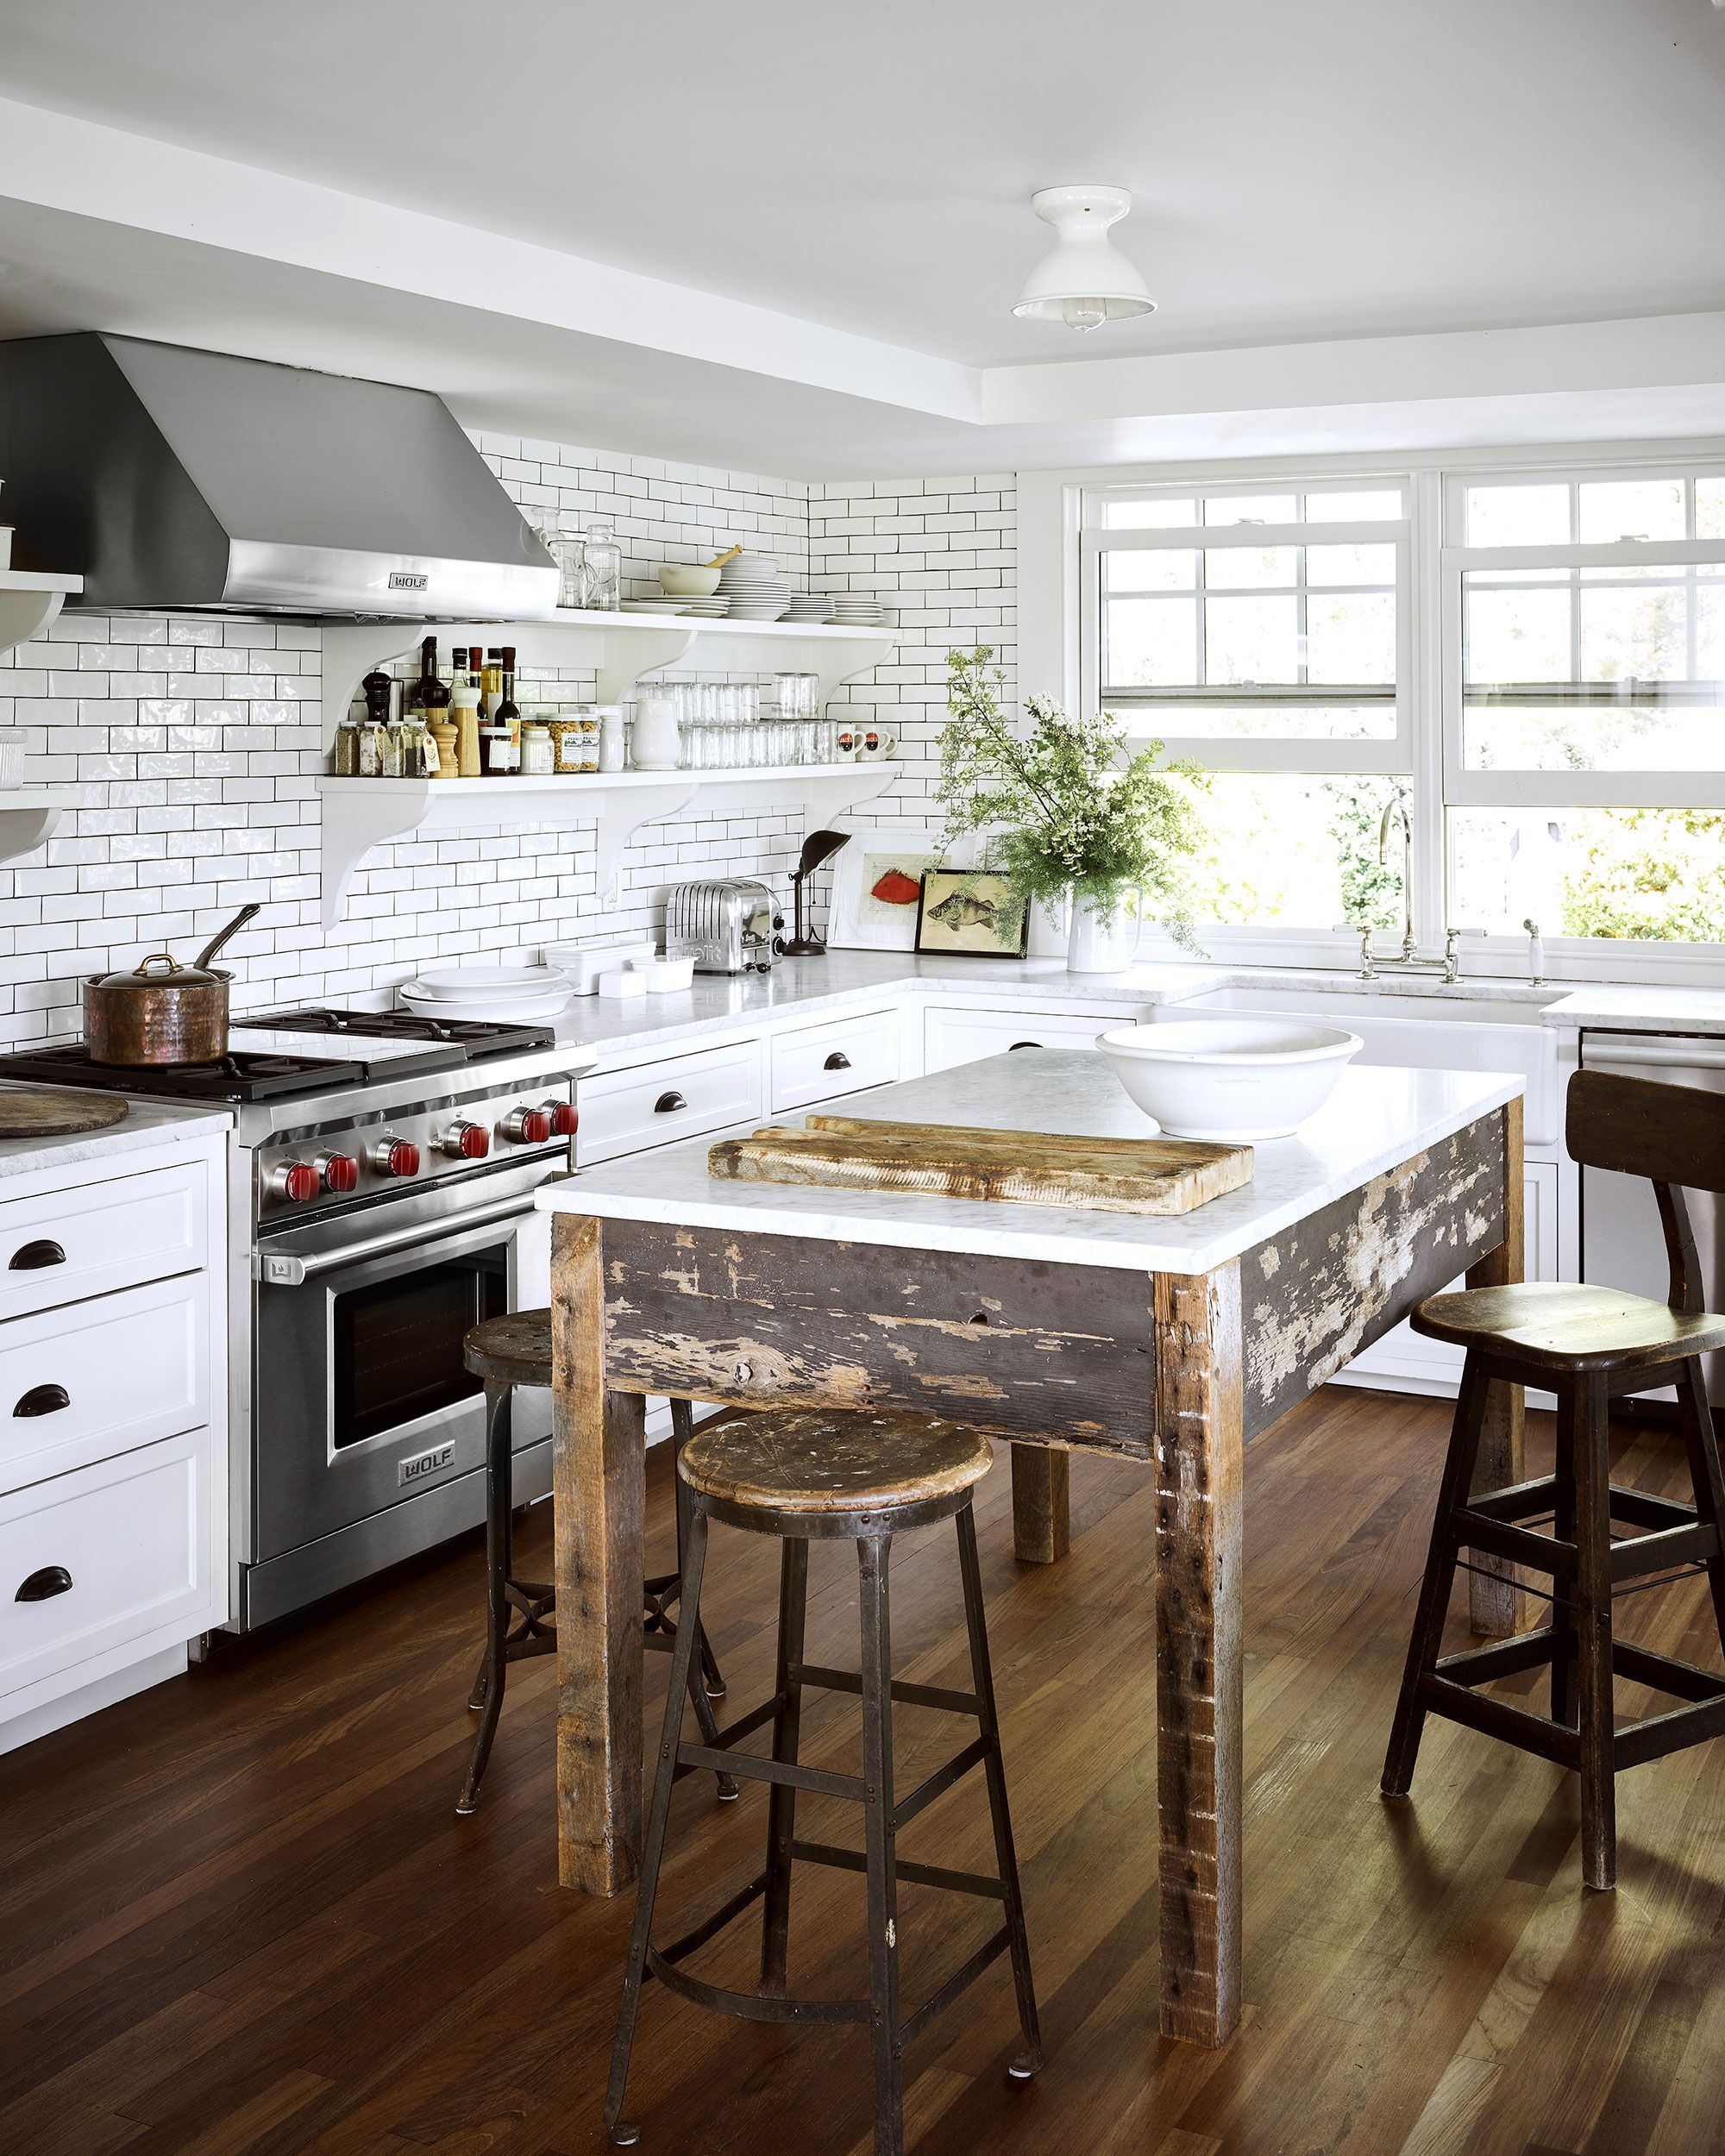 15 Kitchen Decor Ideas With Farmhouse Style - The Unlikely Hostess